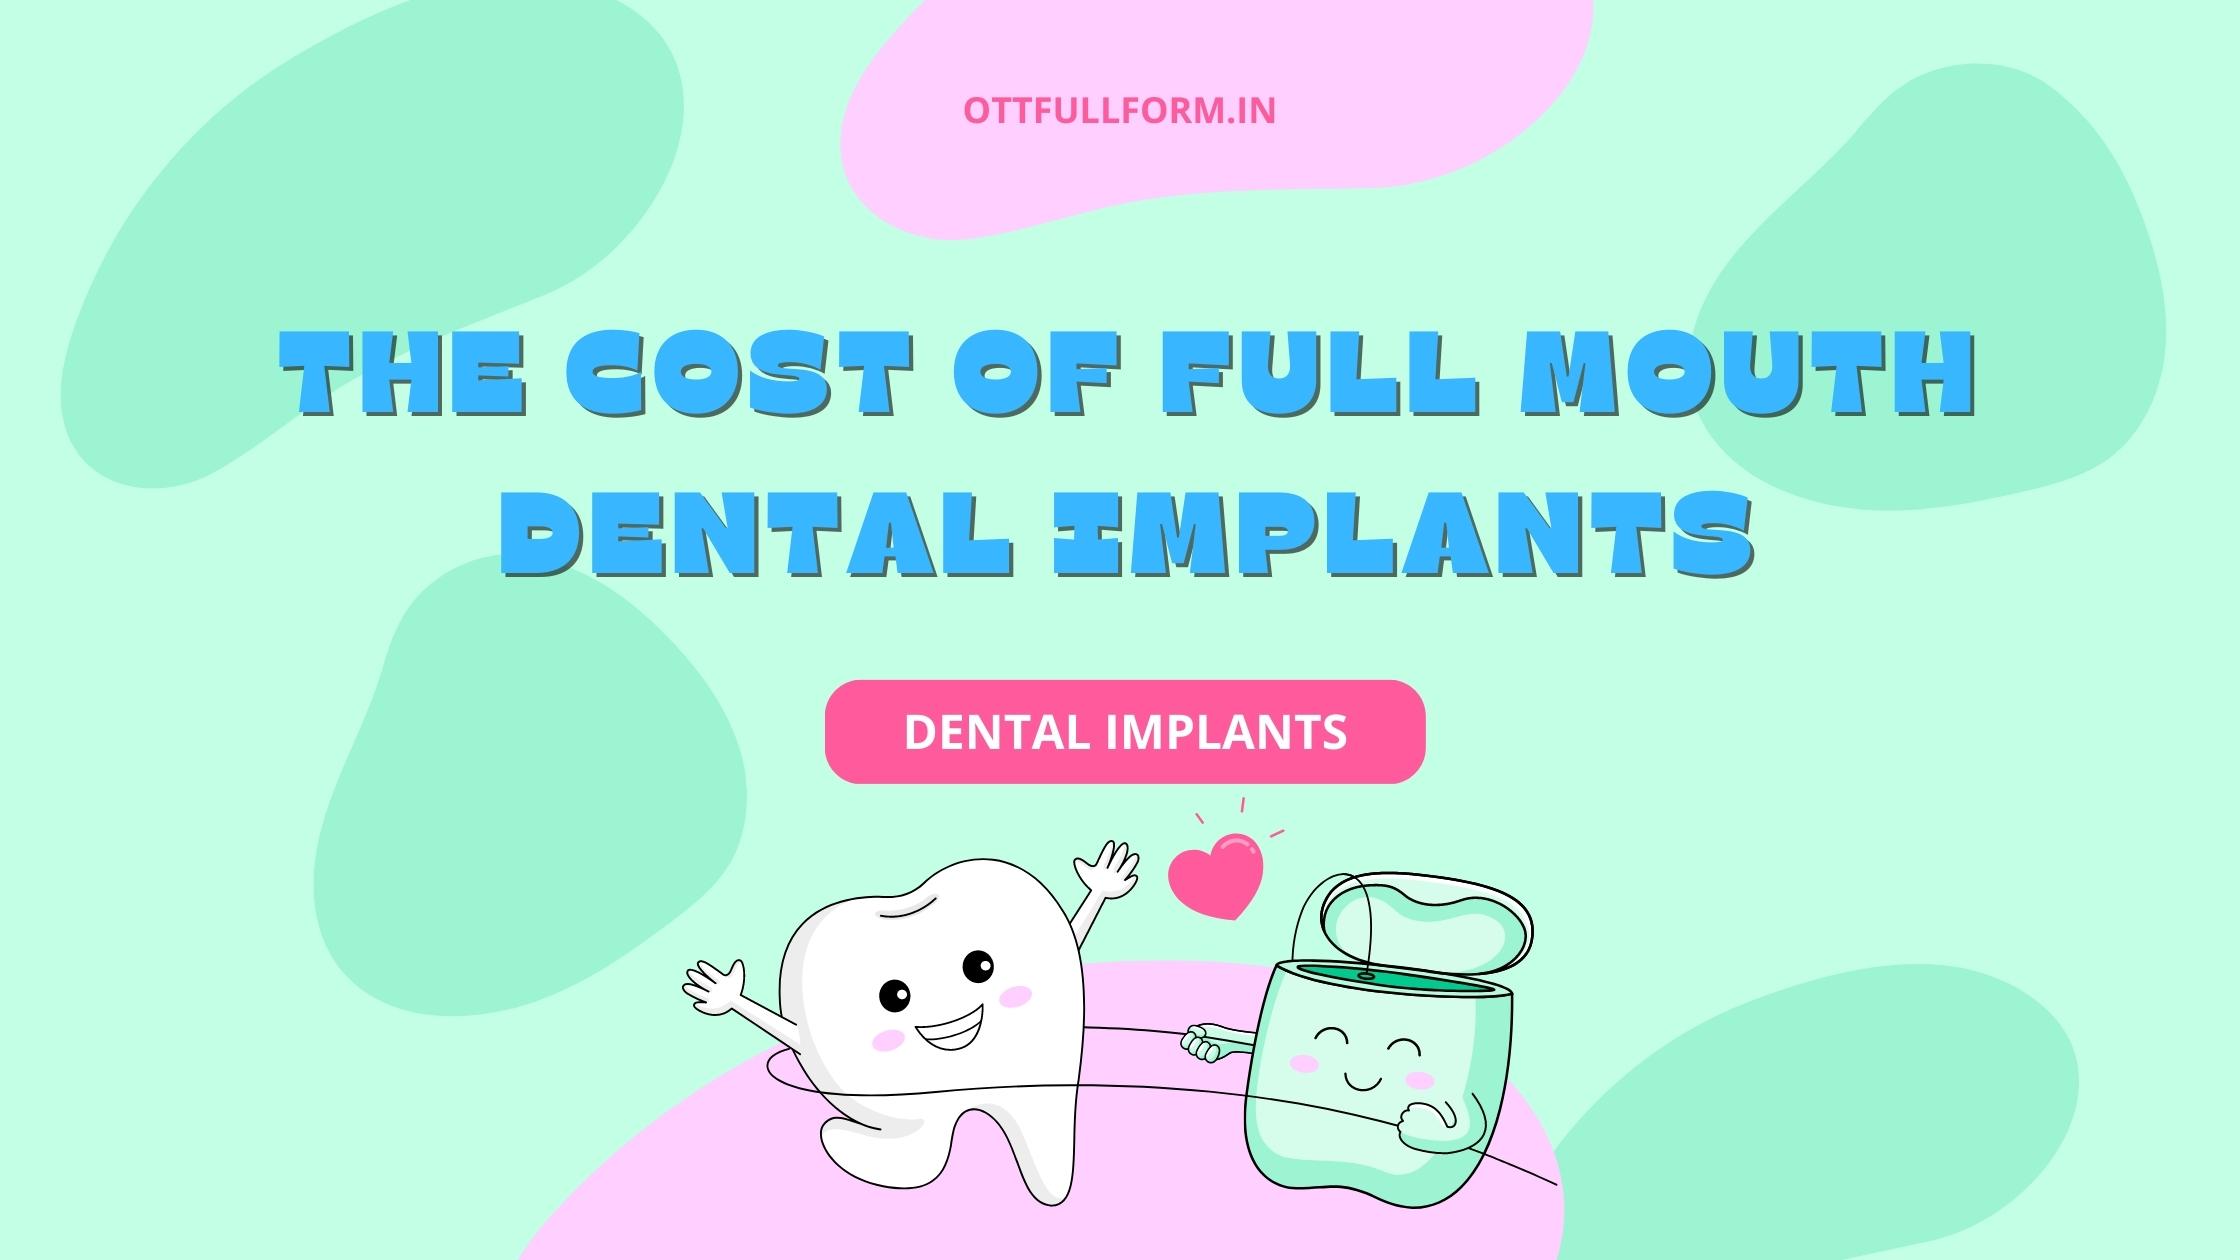 The Cost of Full Mouth Dental Implants 2023